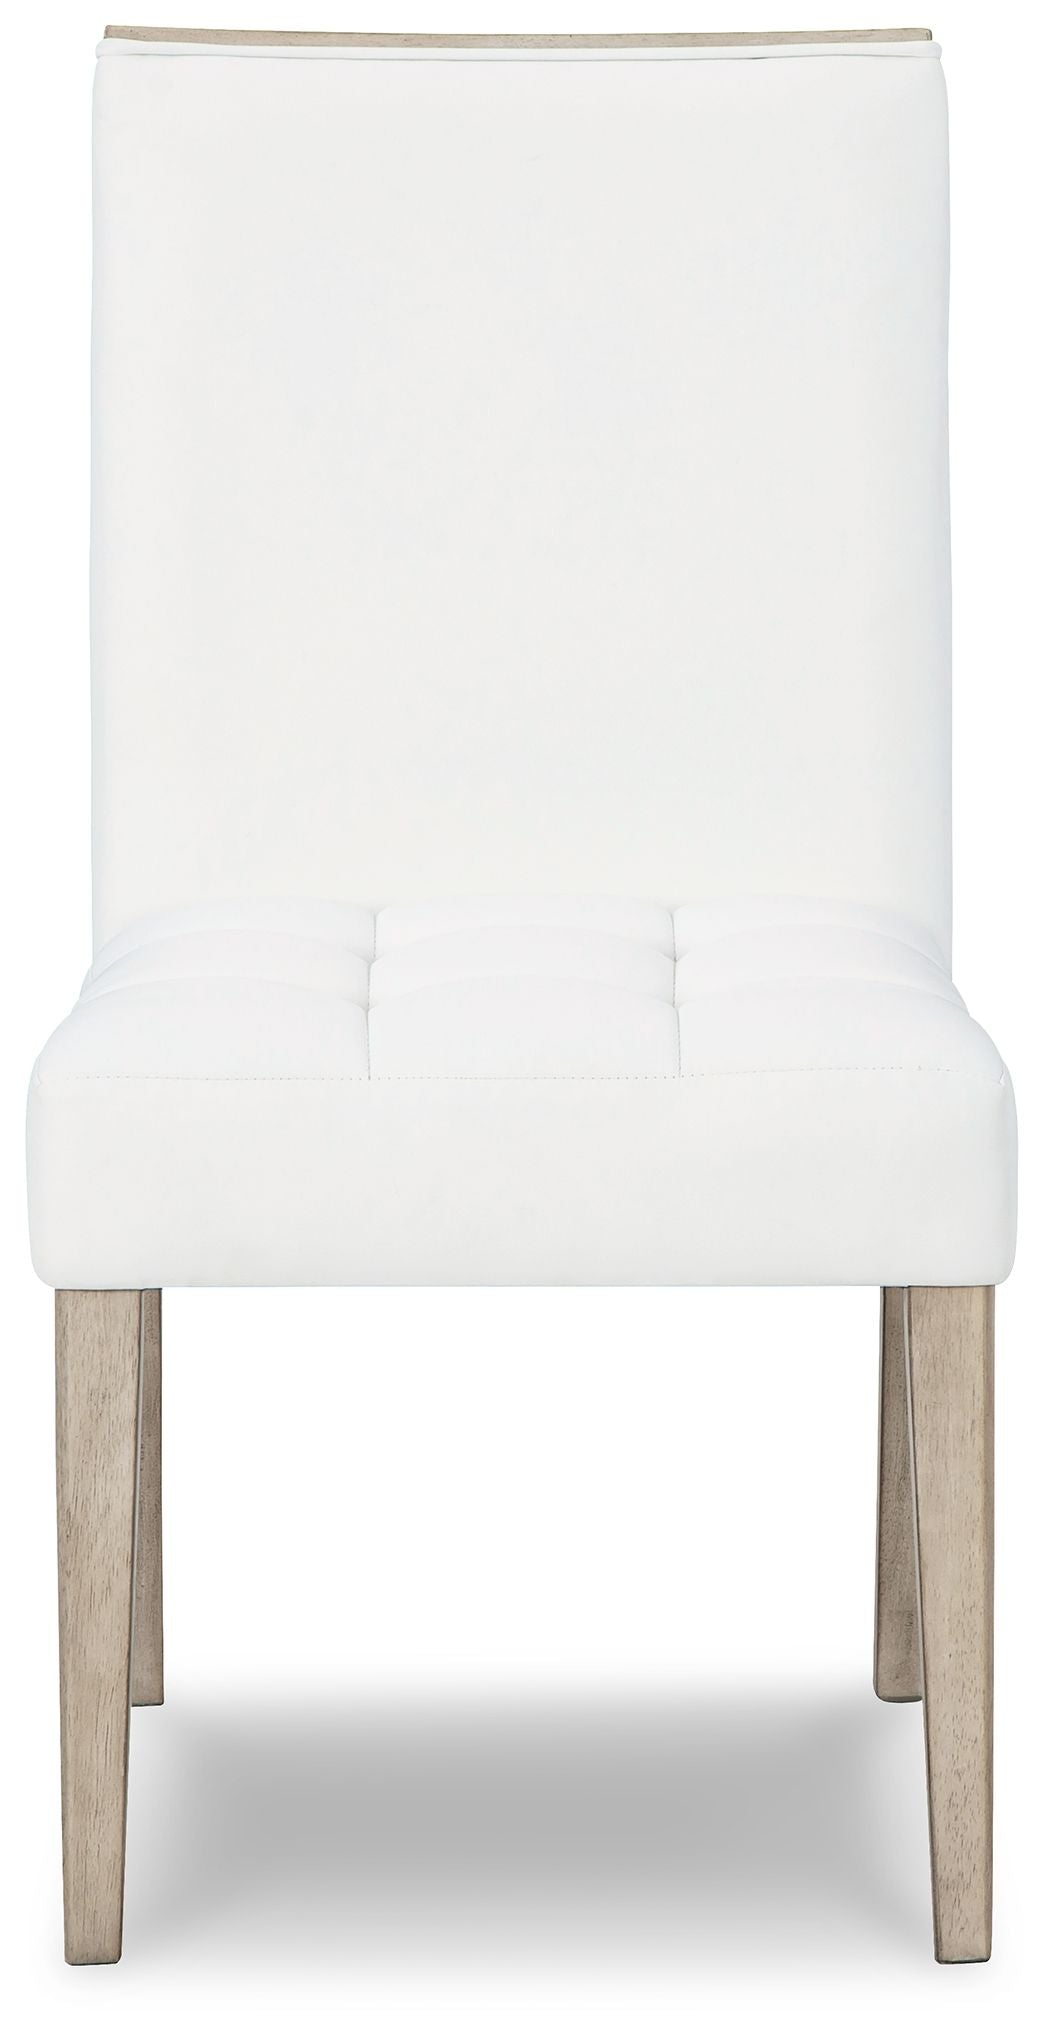 Wendora - Bisque / White - Dining Uph Side Chair (Set of 2)